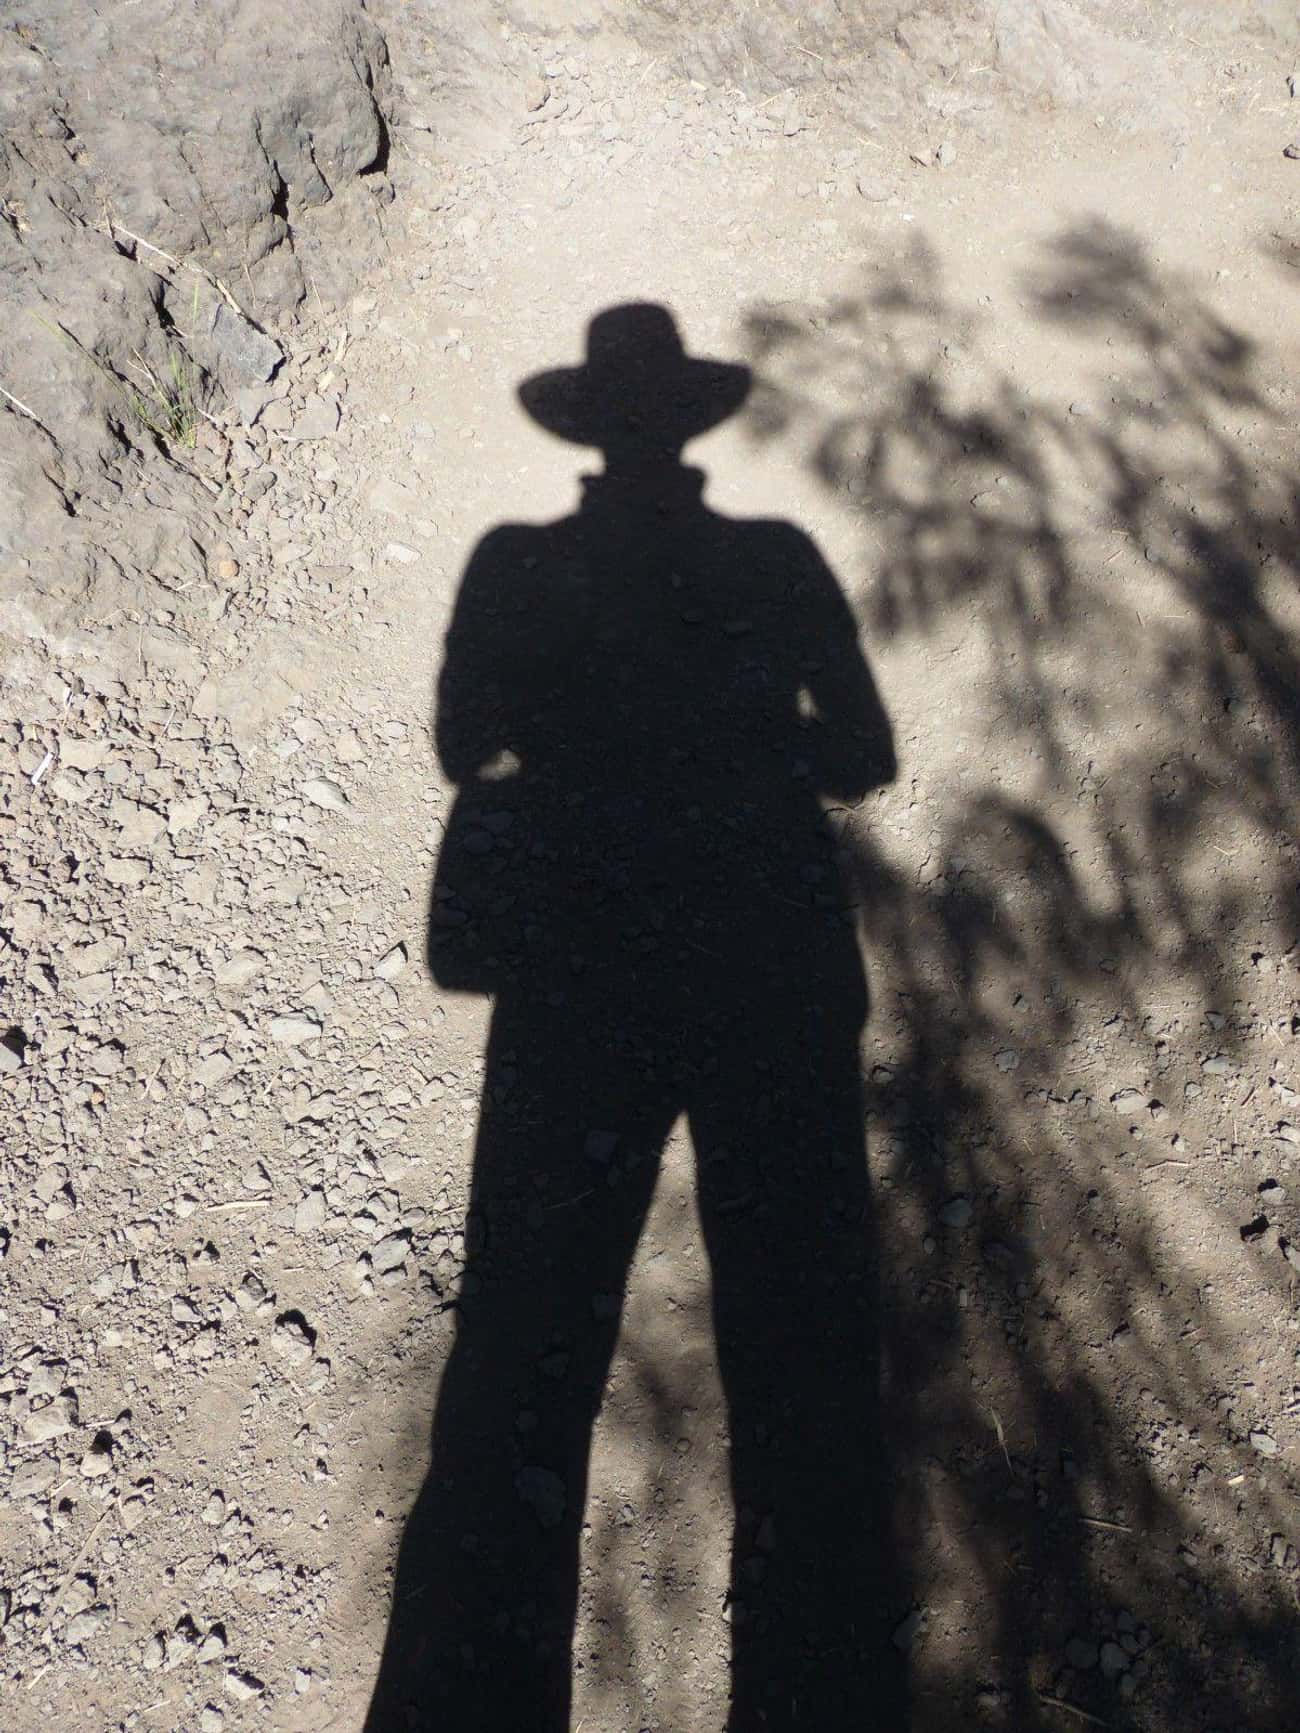 Like Shadow People, The Hat Man Often Appears When People Are Experiencing Sleep Paralysis